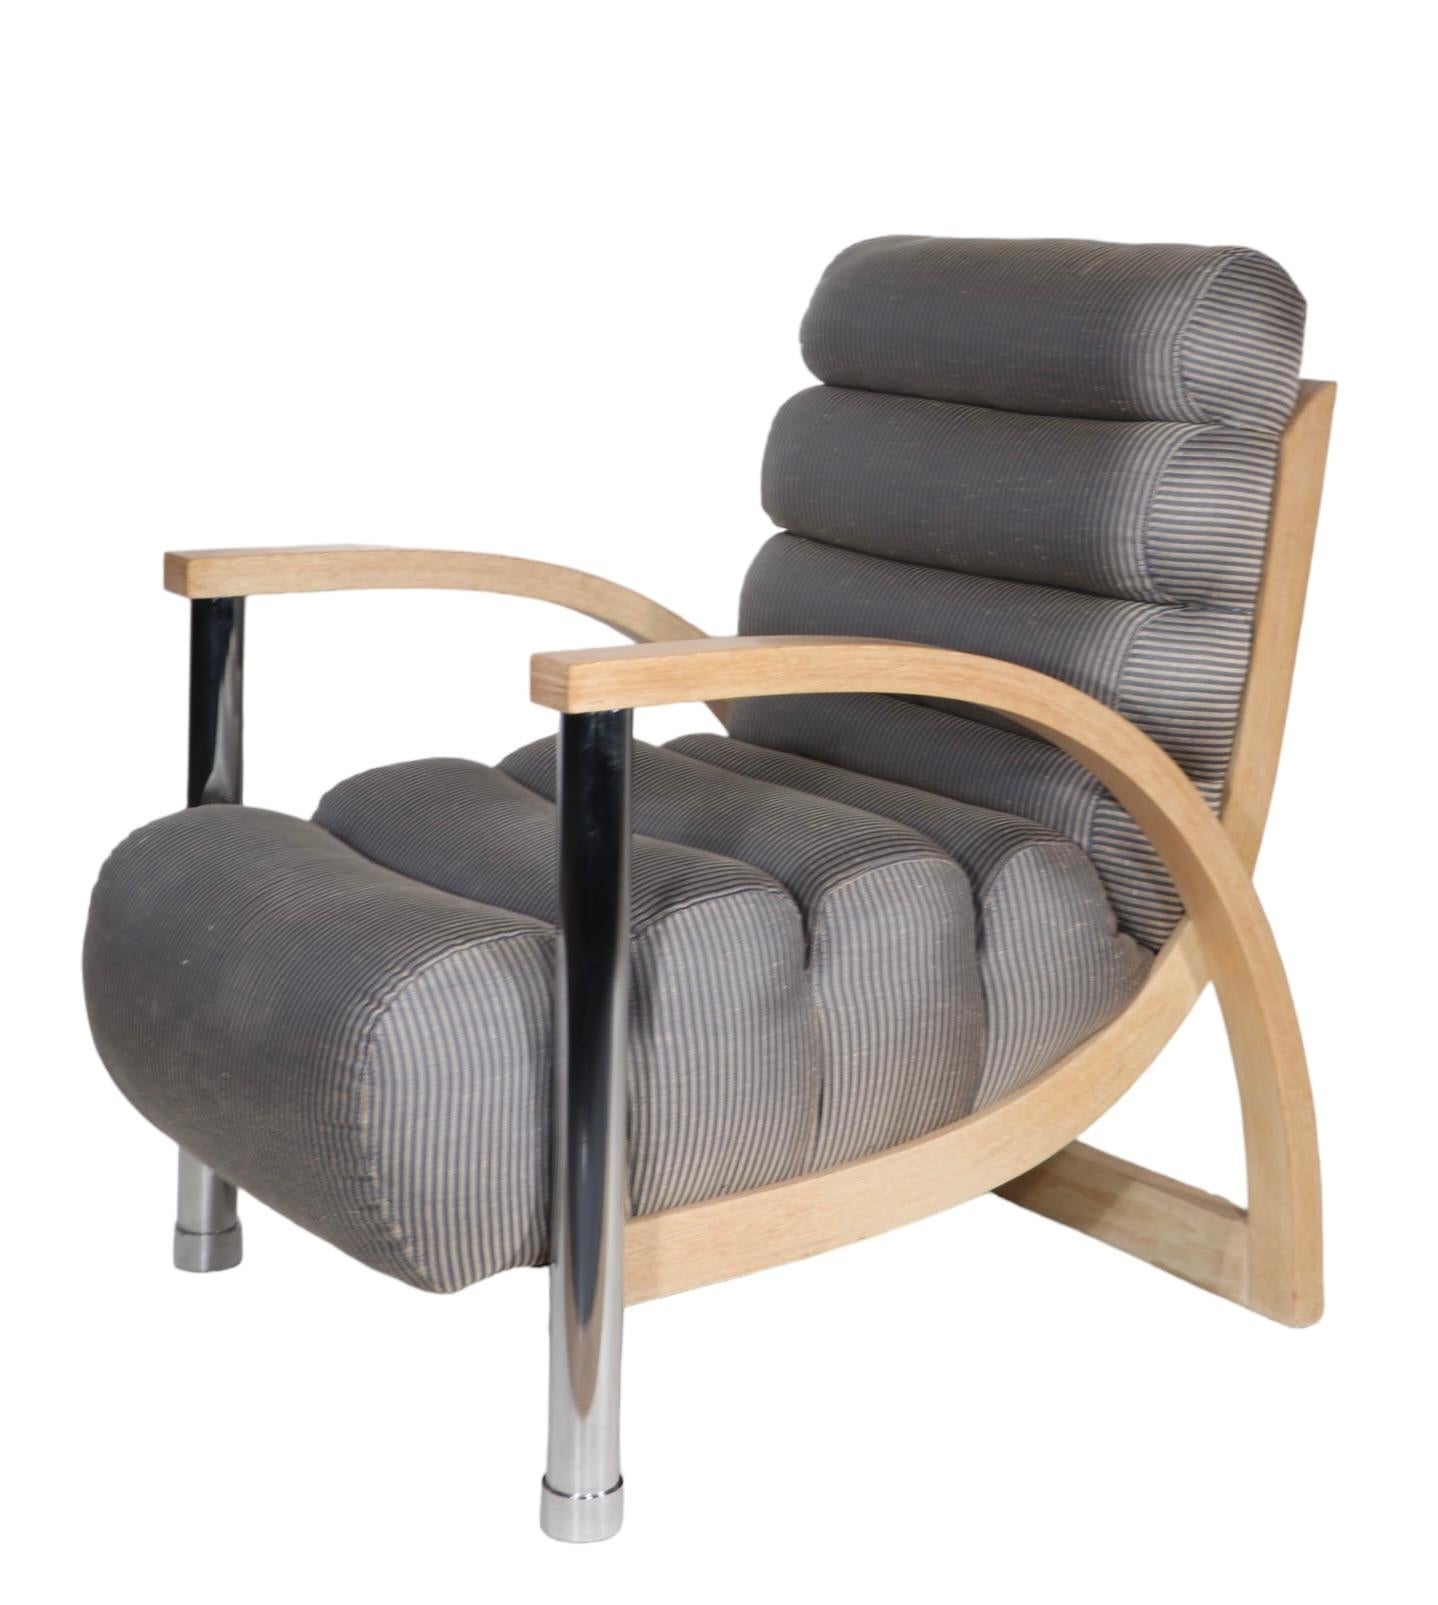 Post Modern Eclipse Lounge Chair by Jay Specter for Century Furniture c 1970/80s For Sale 3